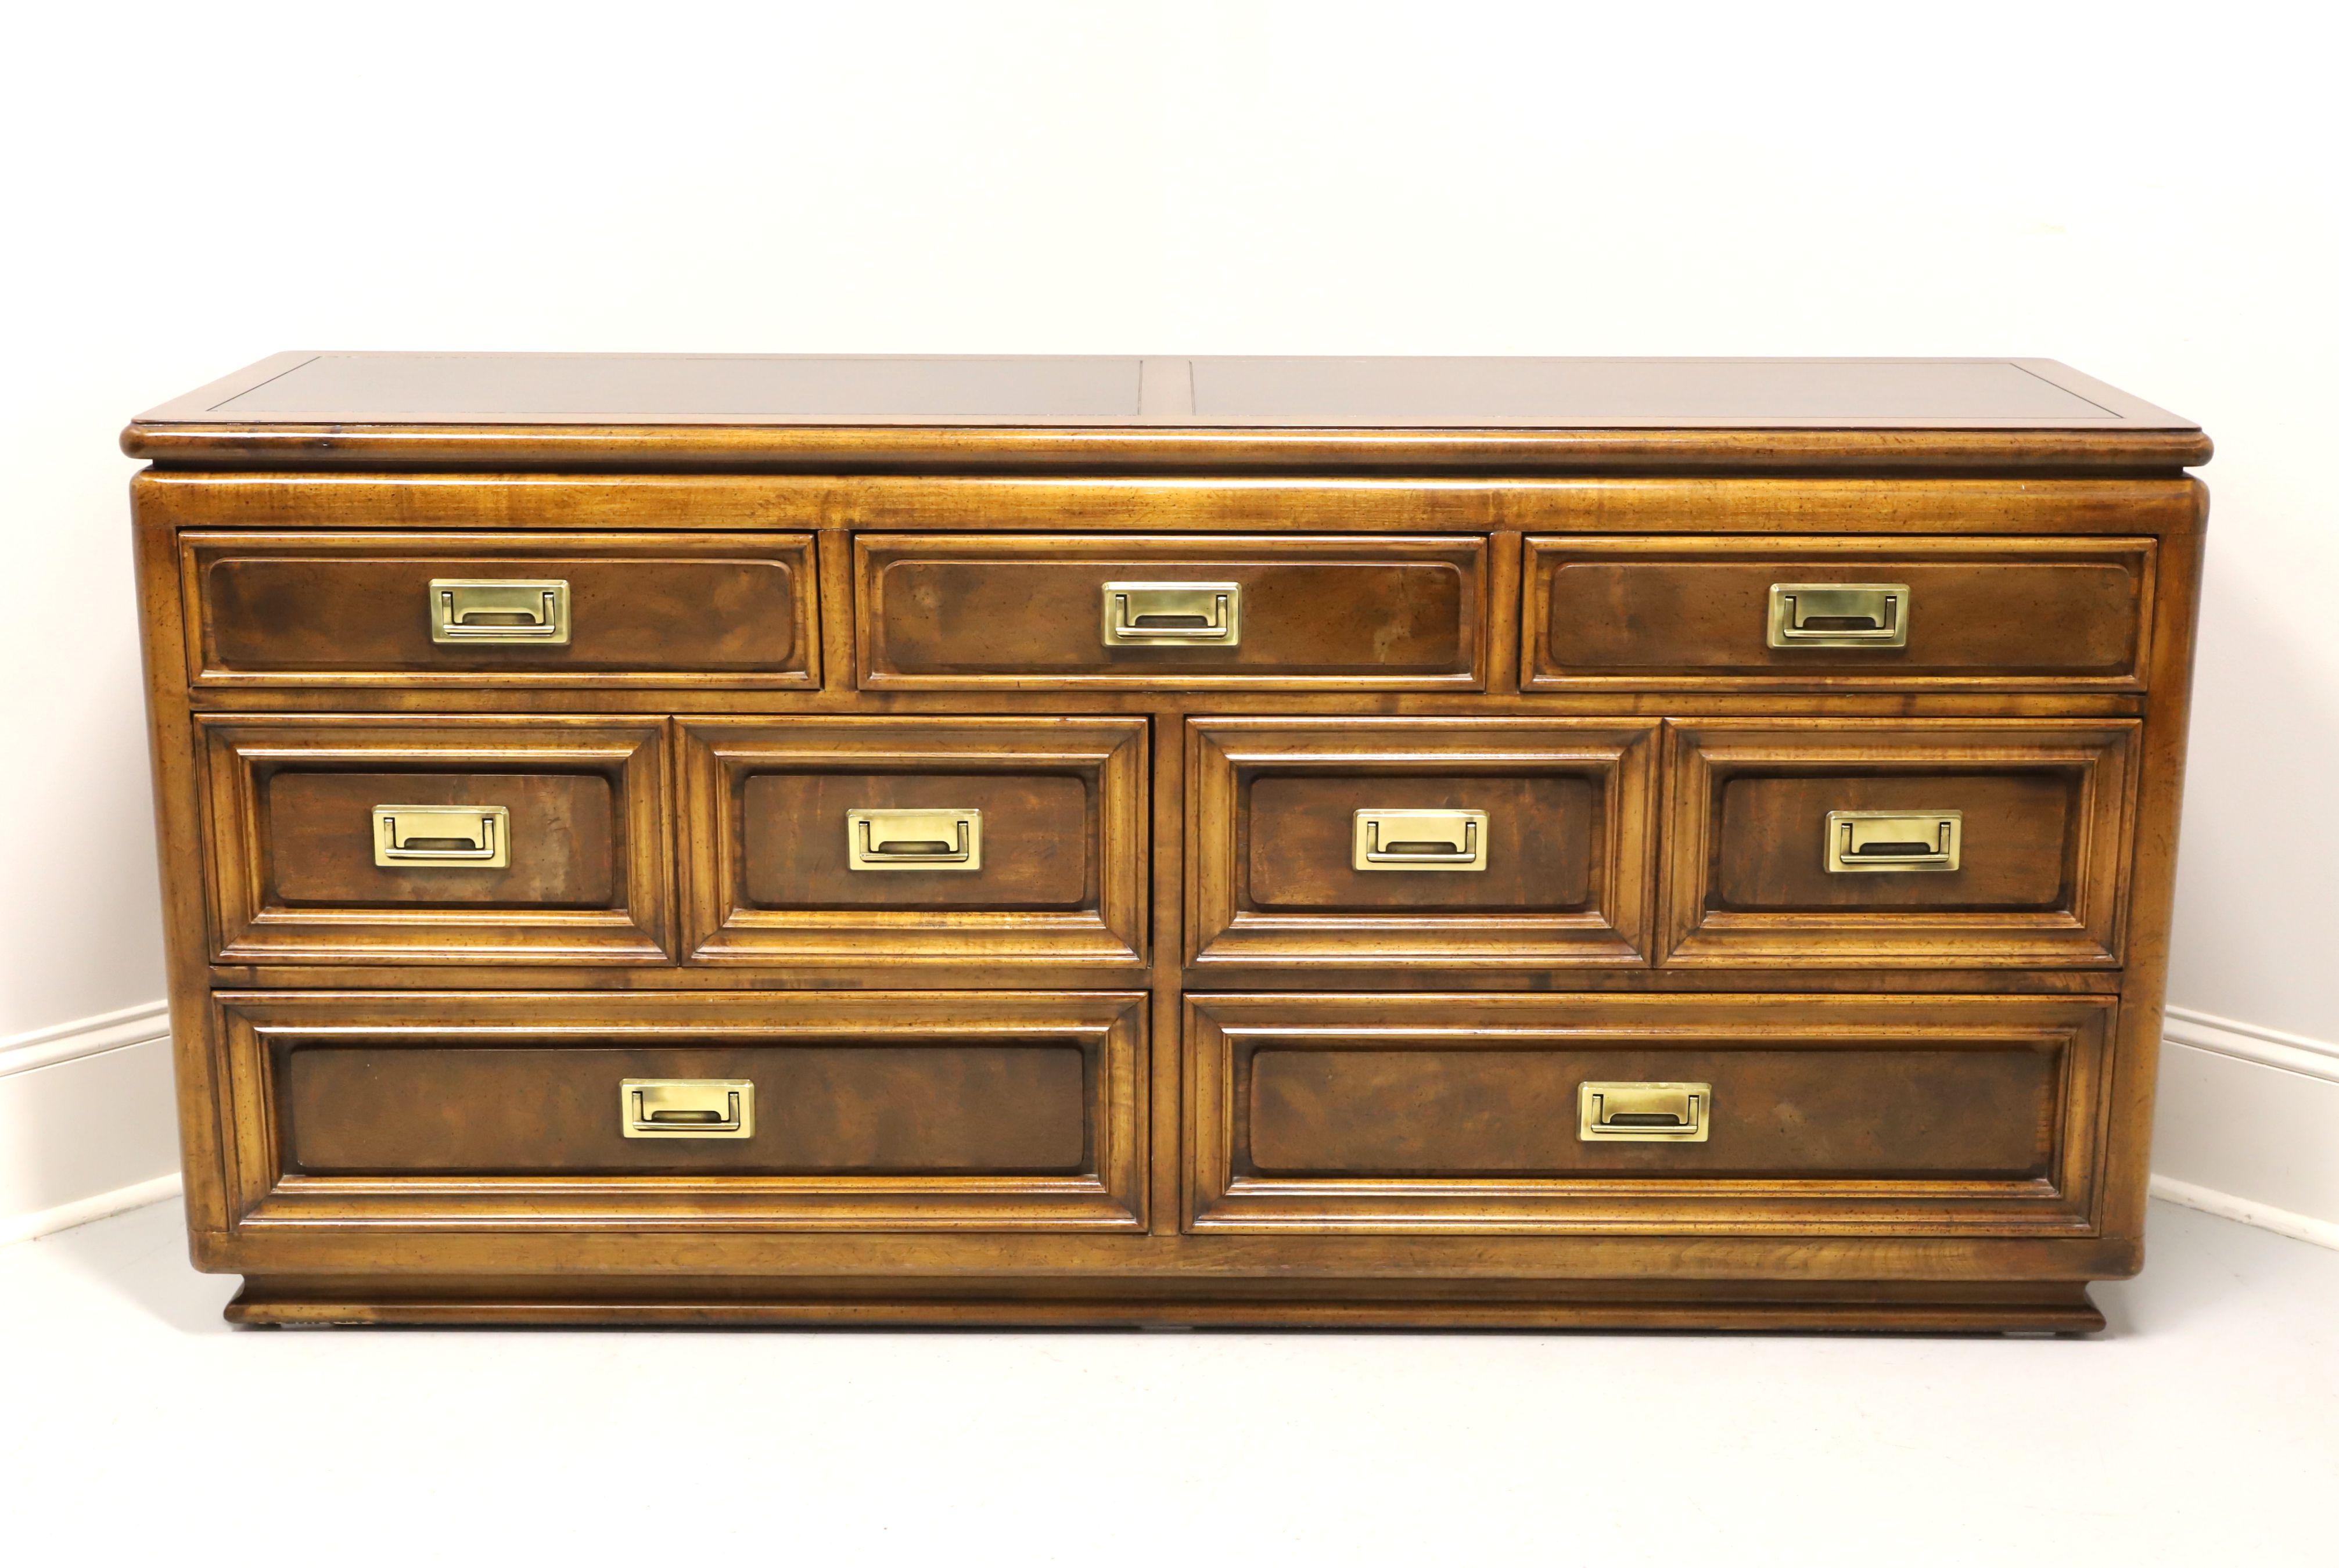 An Asian style triple dresser by Unique Furniture. Nutwood with slightly distressed finish, burlwood to top & drawer fronts, banded top and brass hardware. Features three smaller over four larger drawers of dovetail construction. Made in